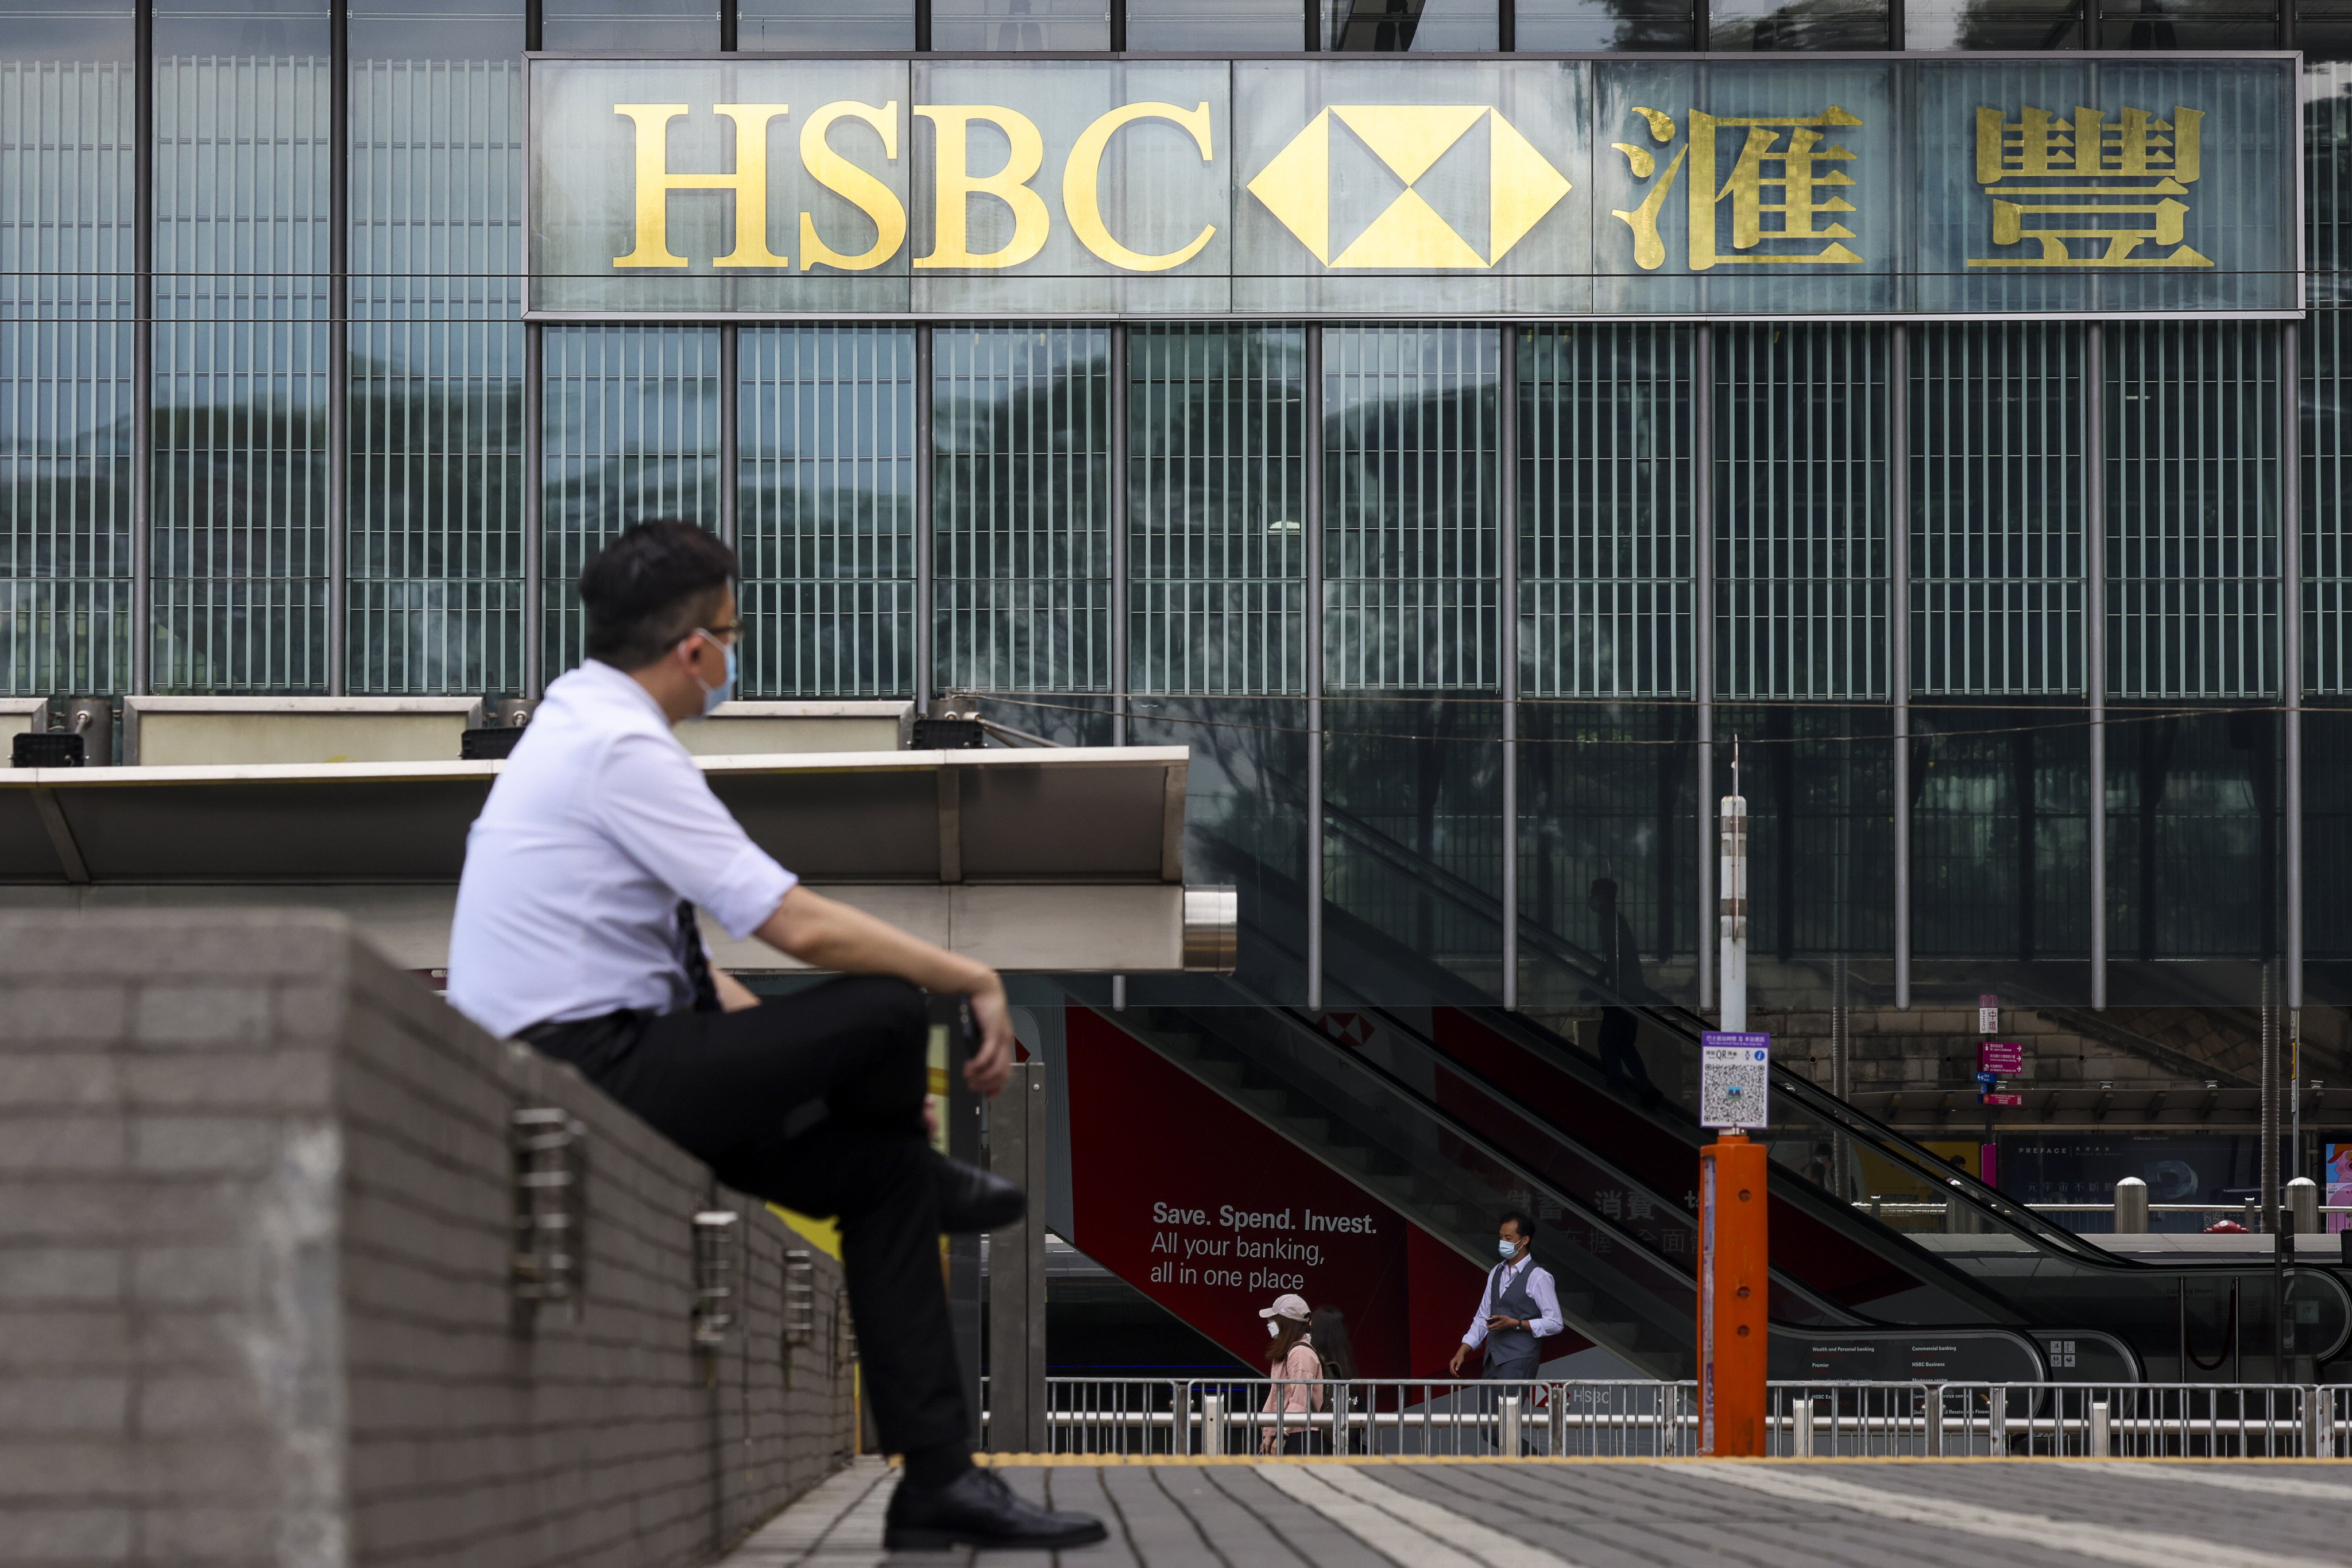 The HSBC main building in Central, Hong Kong, on April 22. While the banking giant is headquartered in the UK, it derives most of its revenue from Asia. Photo: Nora Tam